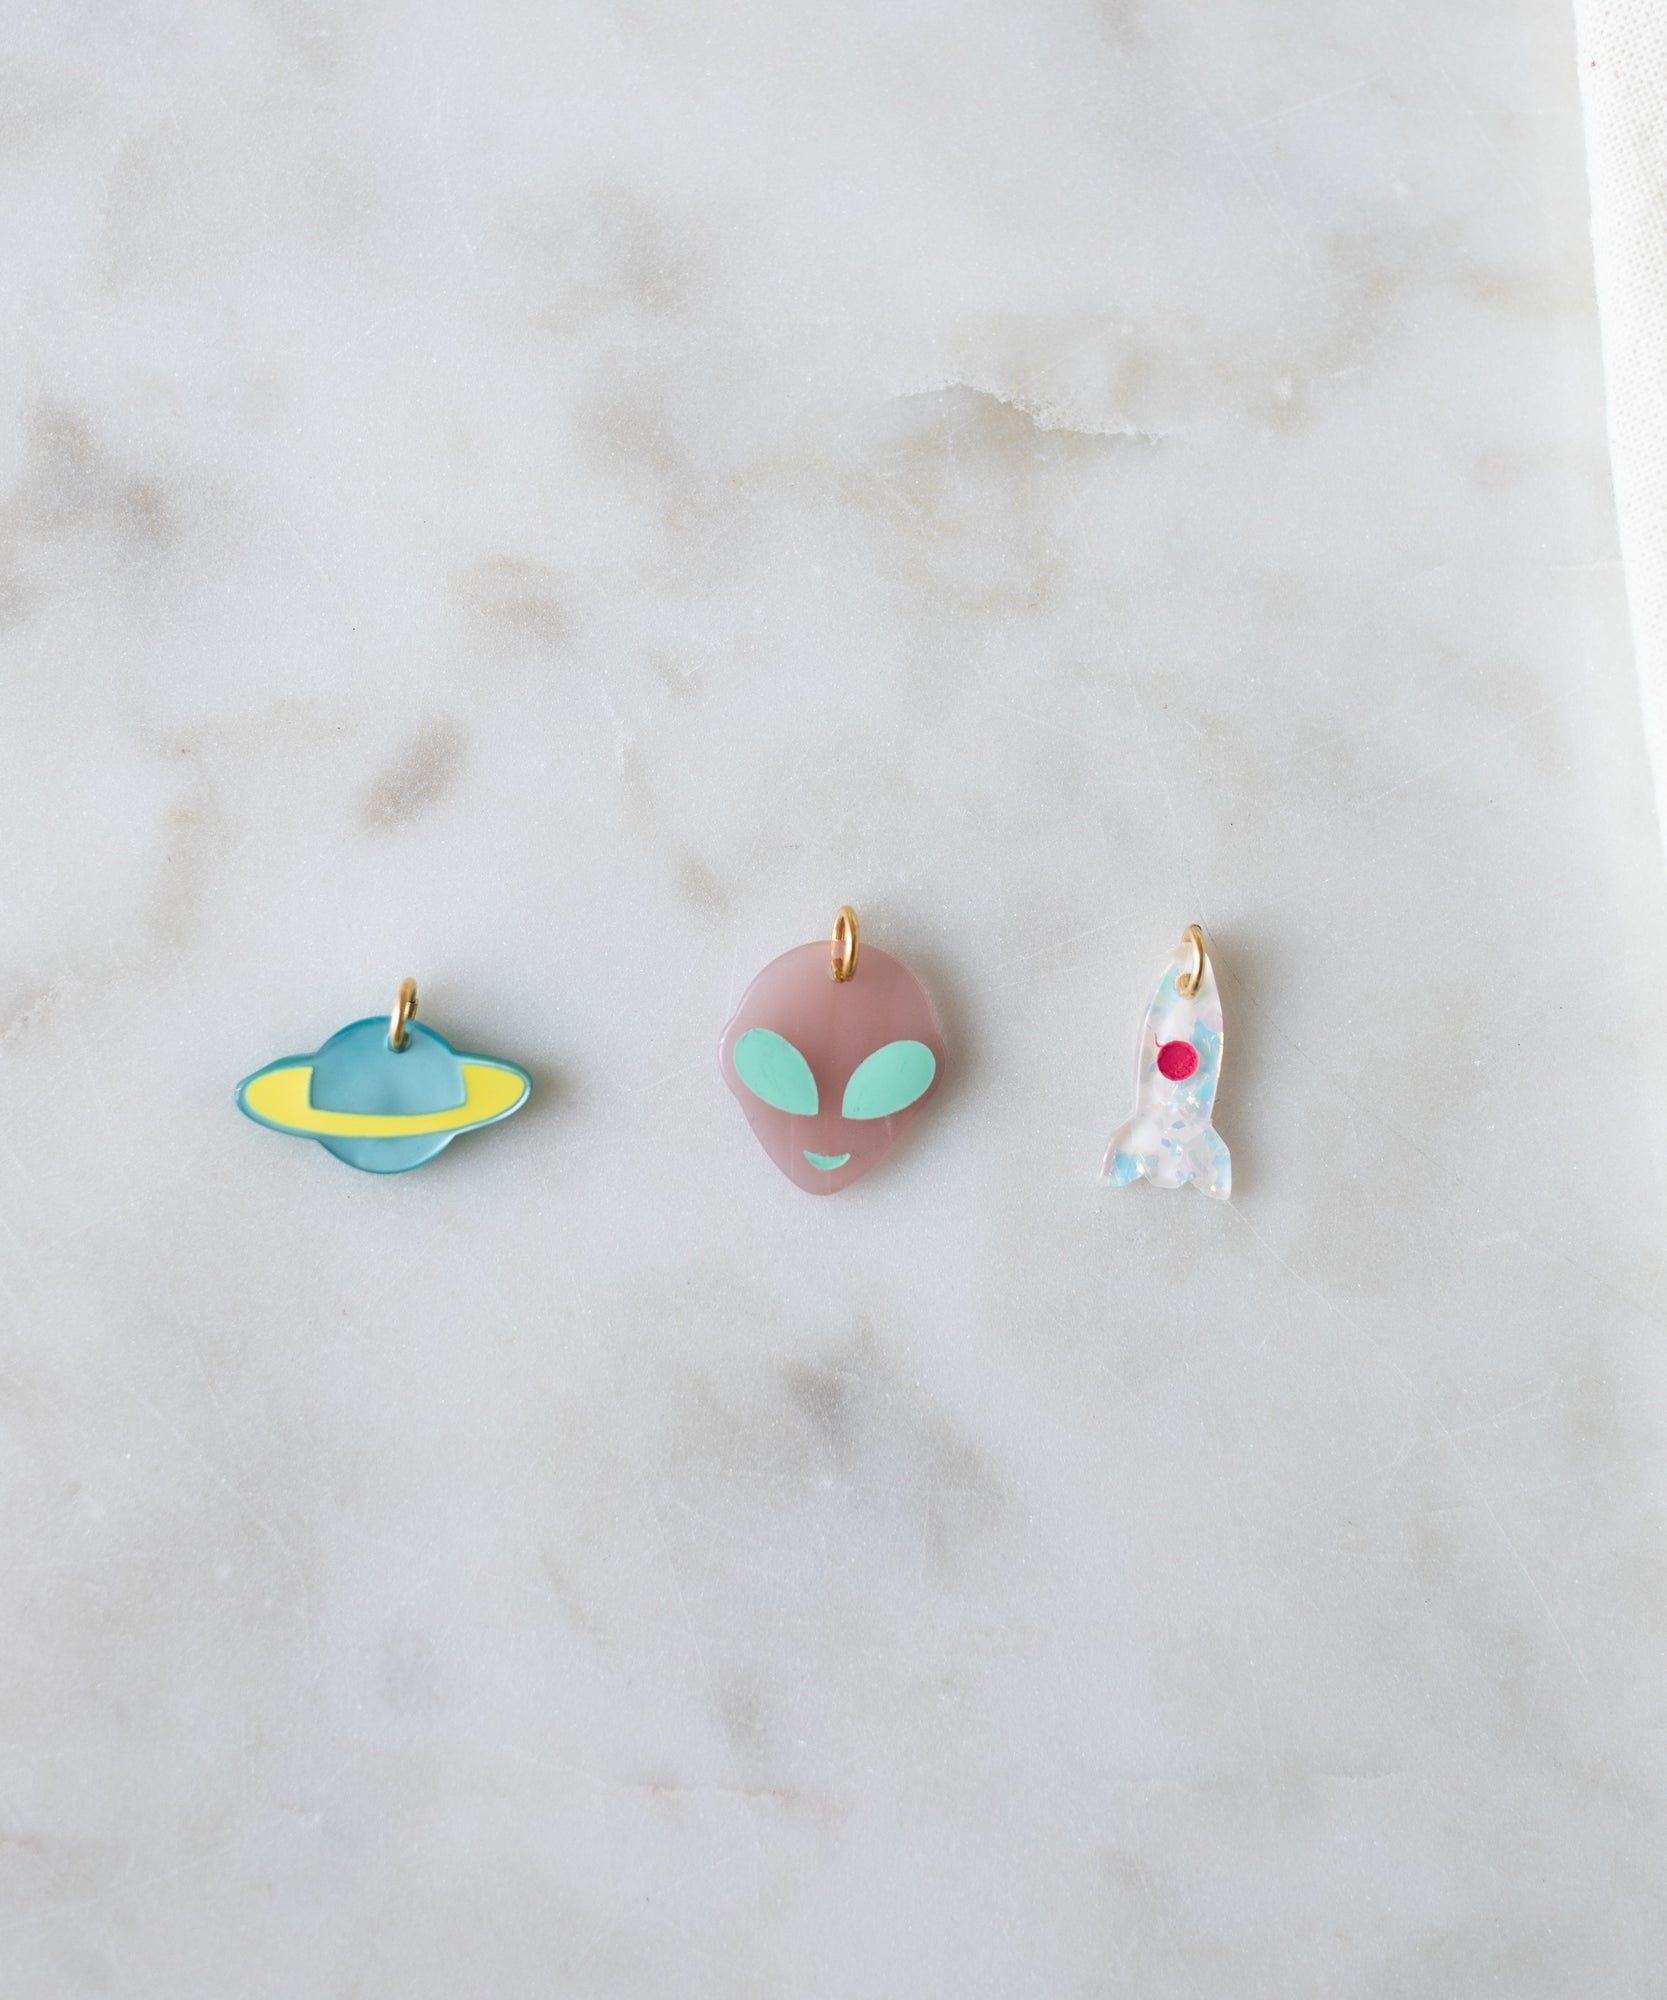 Three quirky Rocket Charms placed on a marble surface: one shaped like a planet, another as an alien head, and a third resembling a clear ghost with a red eye from the WALD World collection.